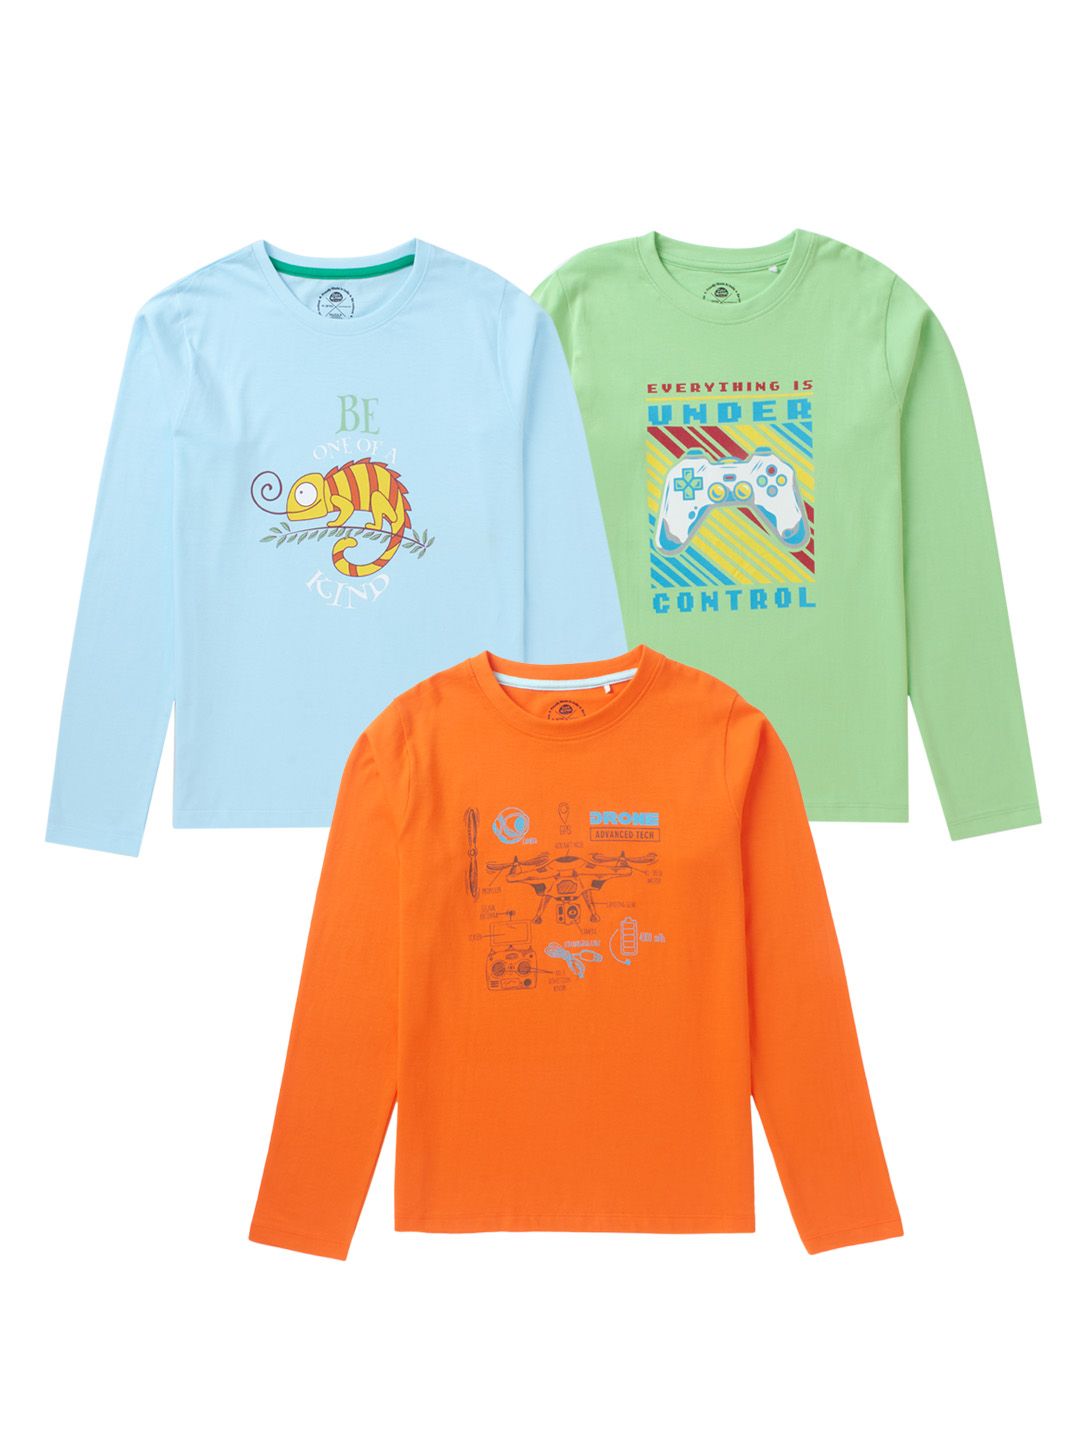 Boys 100% Cotton Full Sleeves Pack of 3 T-Shirts